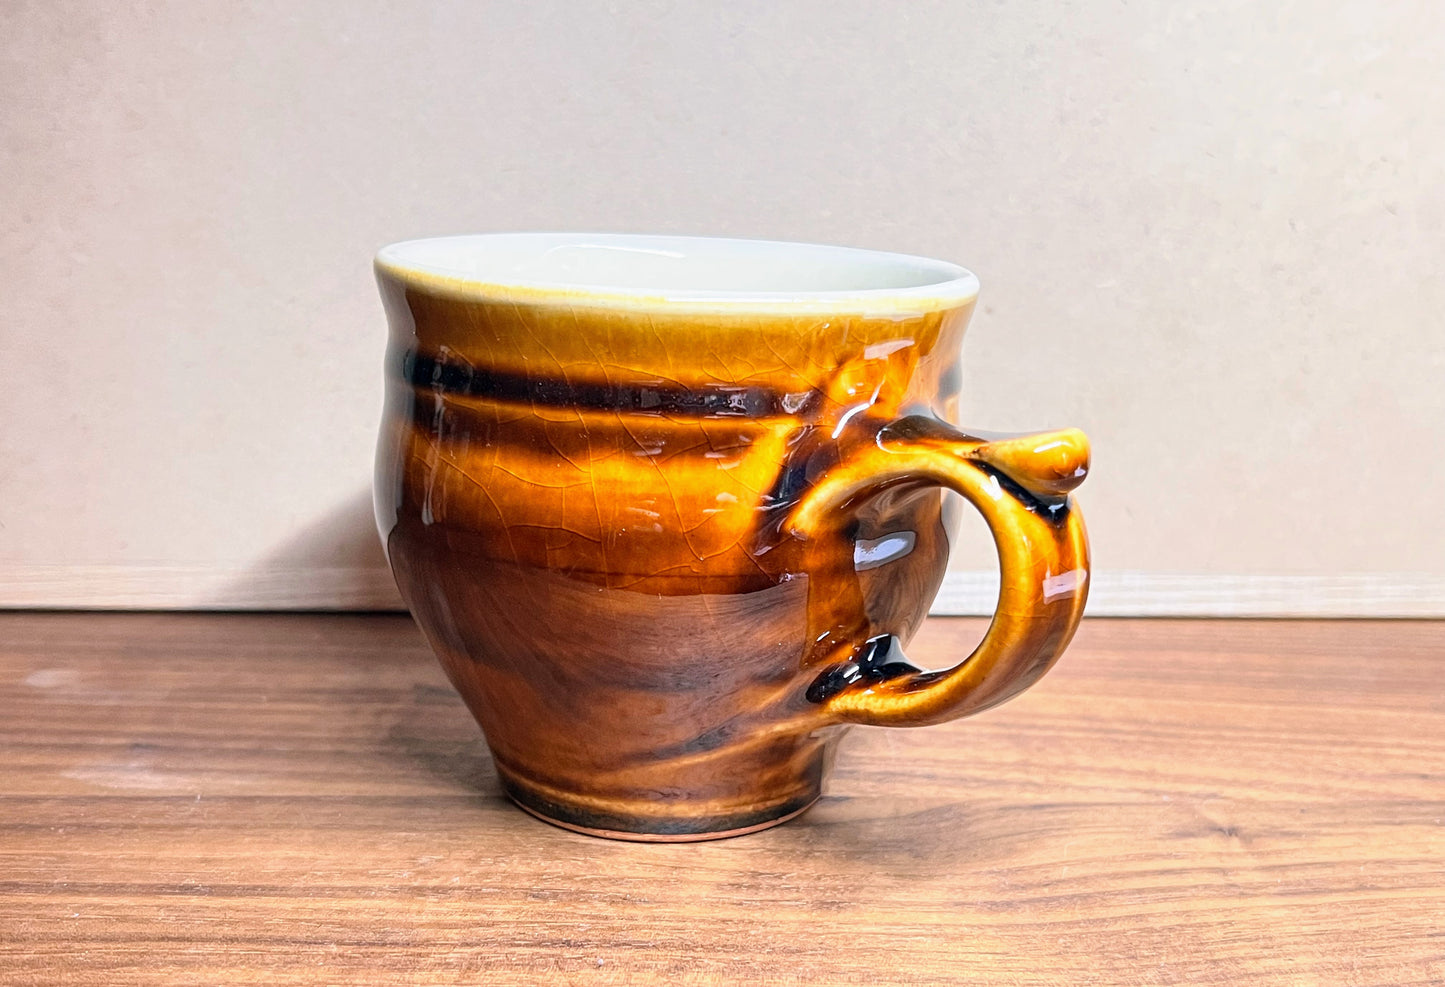 Shusaigama "Morning Cup" Brown